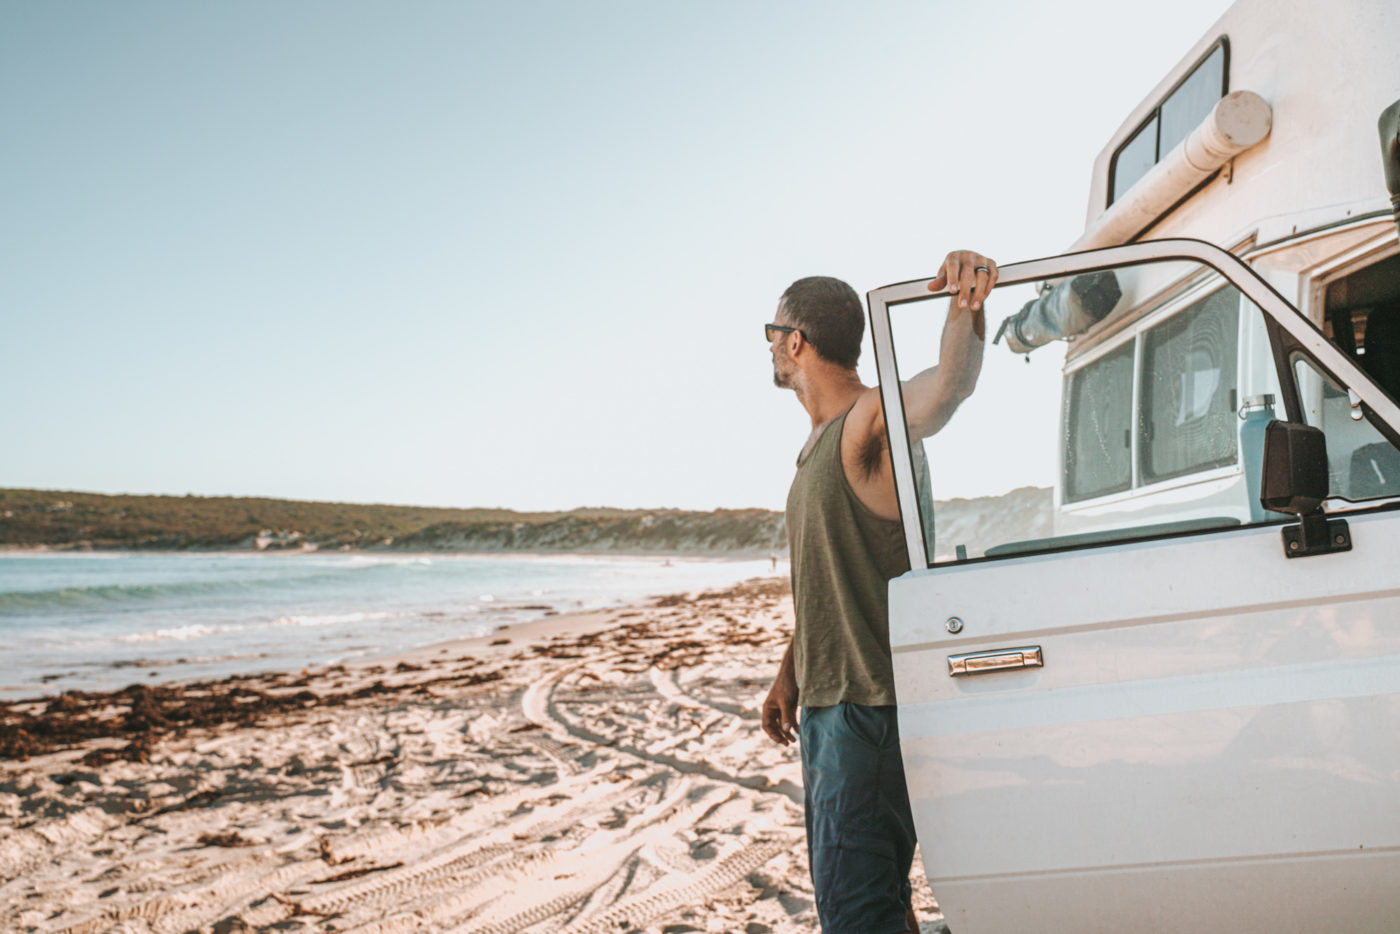 Max with campervan Troopy, Fishery Bay, Eyre Peninsula